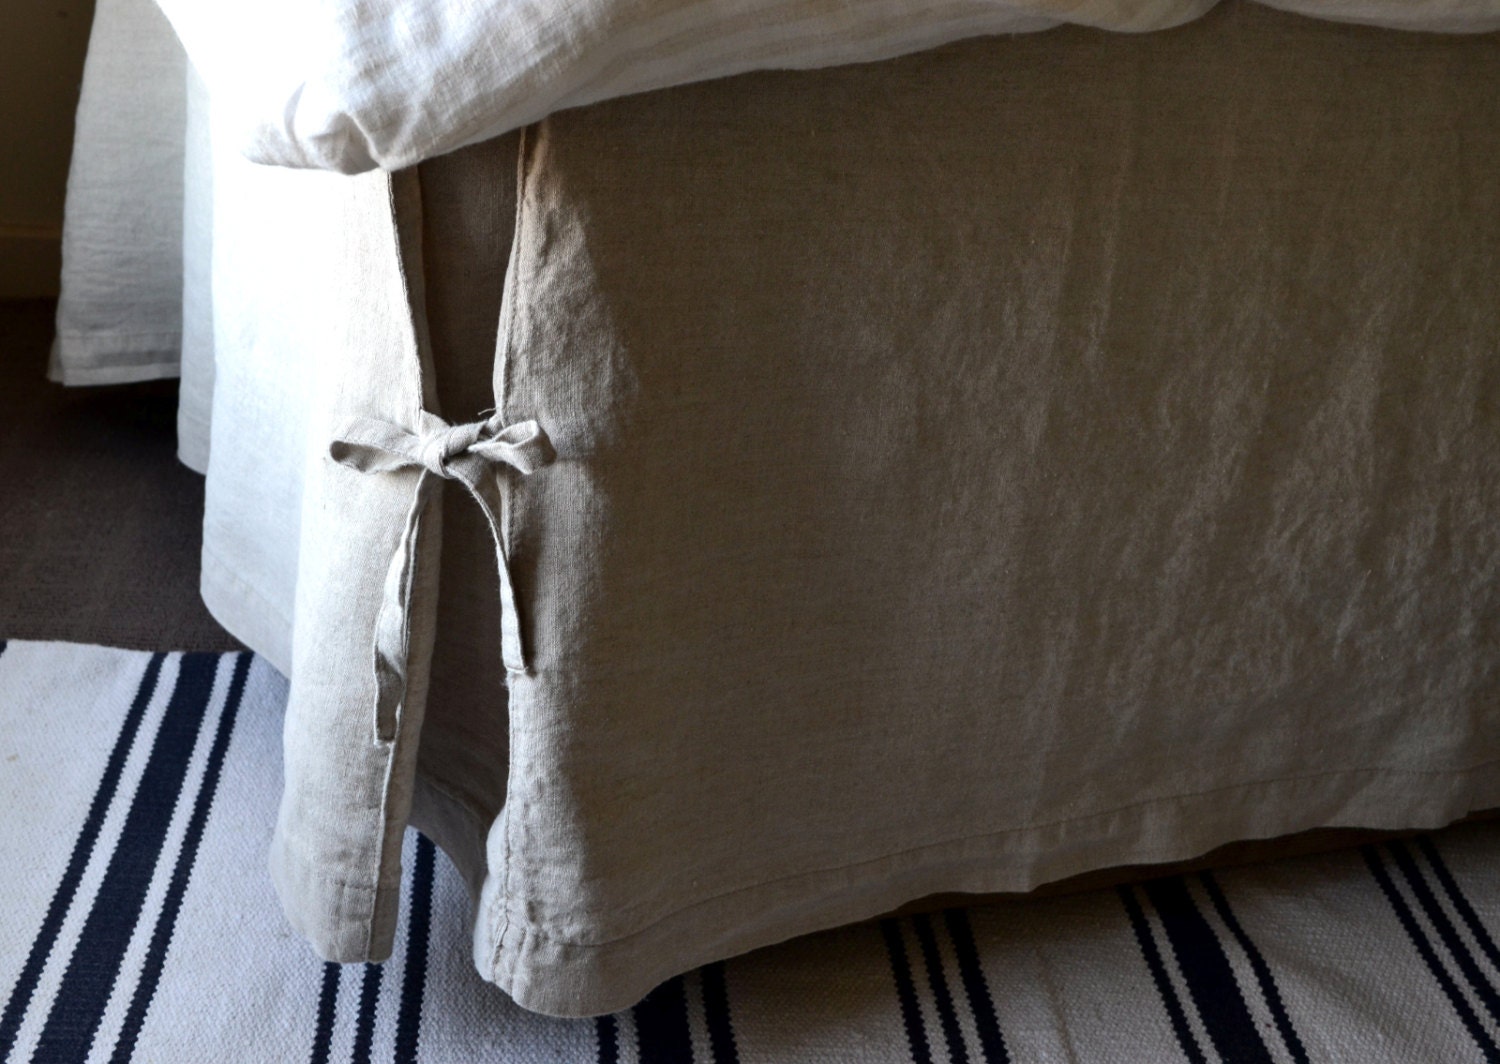 Box Pleated Linen Bedskirt With Ties. Dust ruffle. Valance.